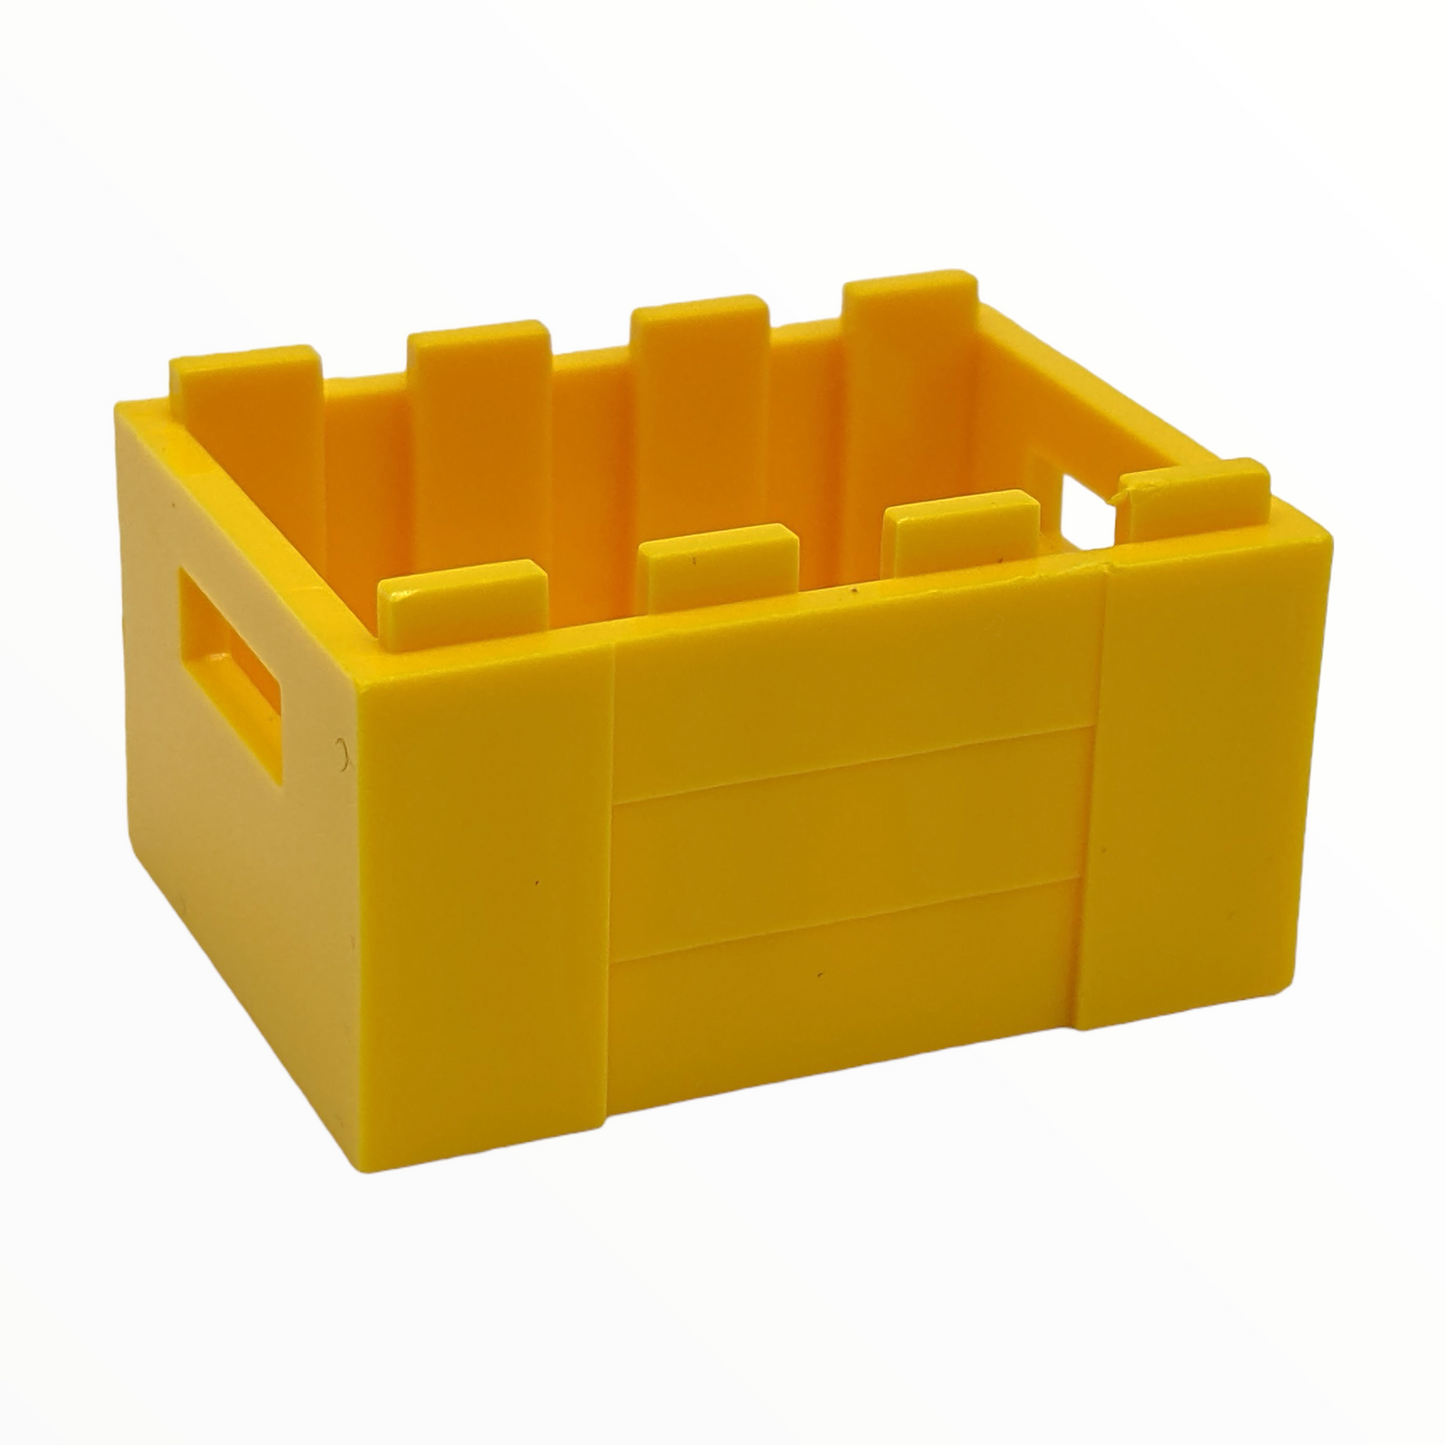 LEGO Container Crate 3x4x1 2/3 in Yellow